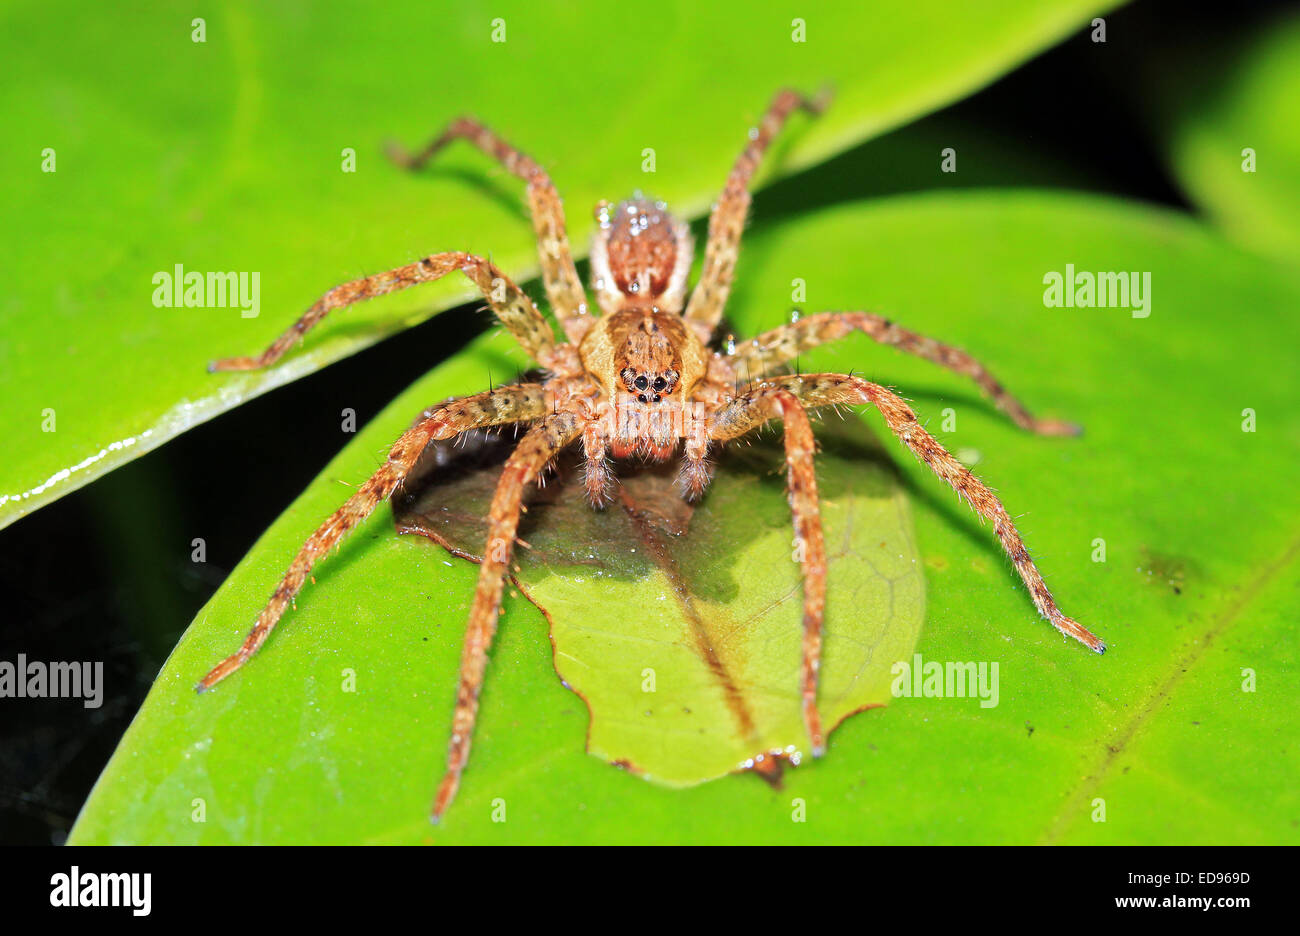 Unidentified Spider on a Leaf, Monteverde Cloud Forest, Costa Rica Stock Photo